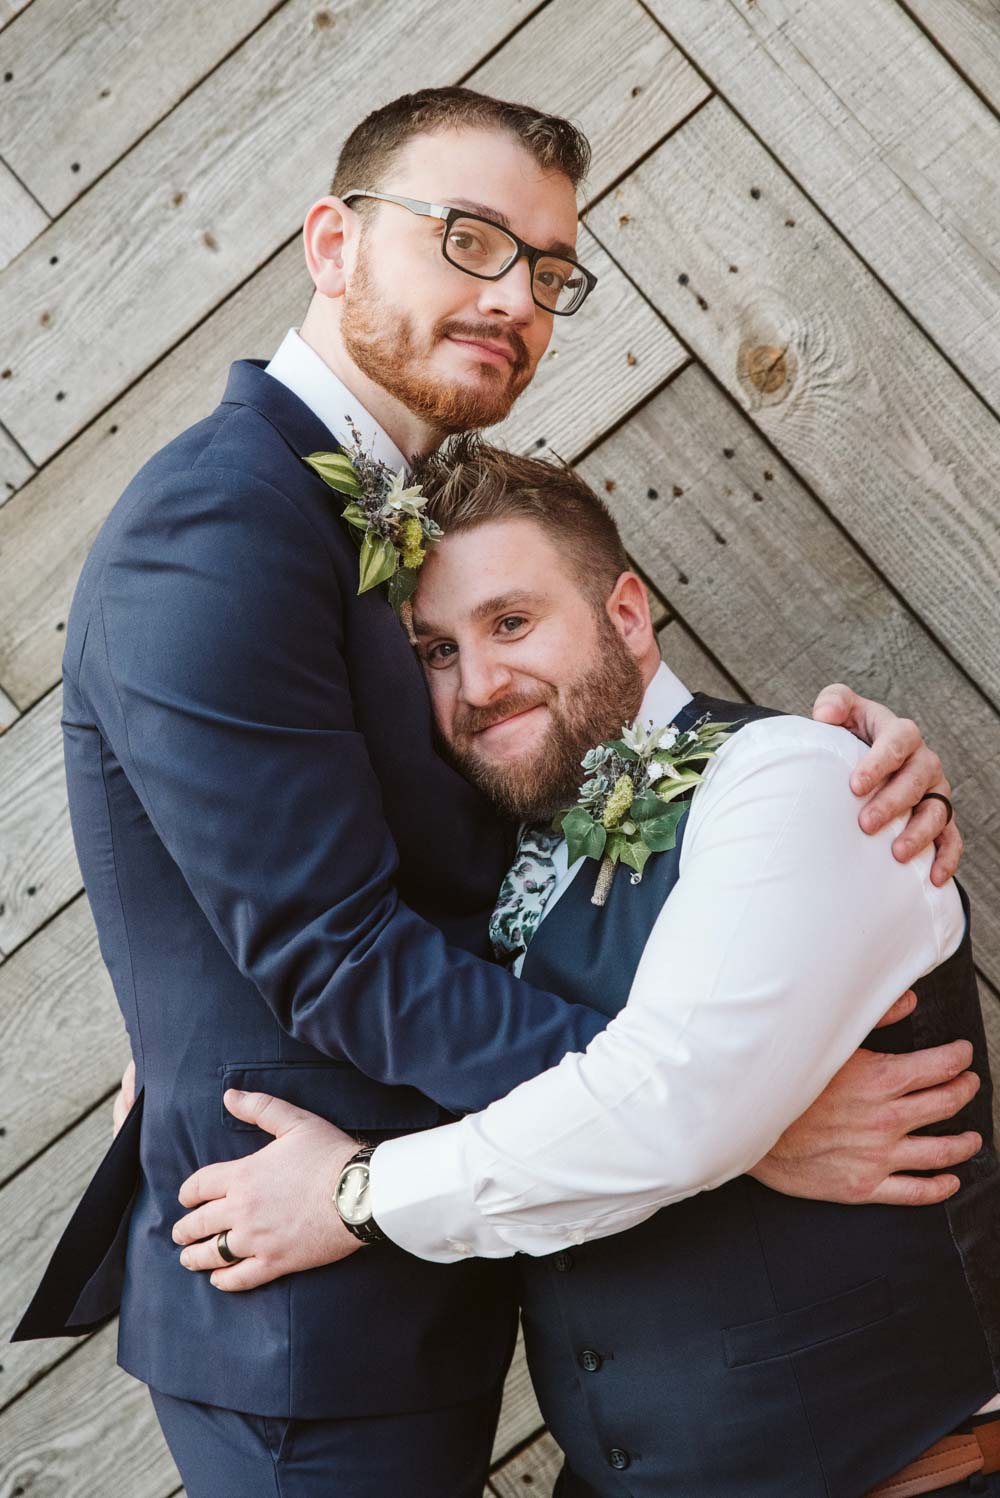 David + Andrew: Midwestern Pride Wedding Giveaway winners marry Photo Glass & Grain Photography published on Equally Wed